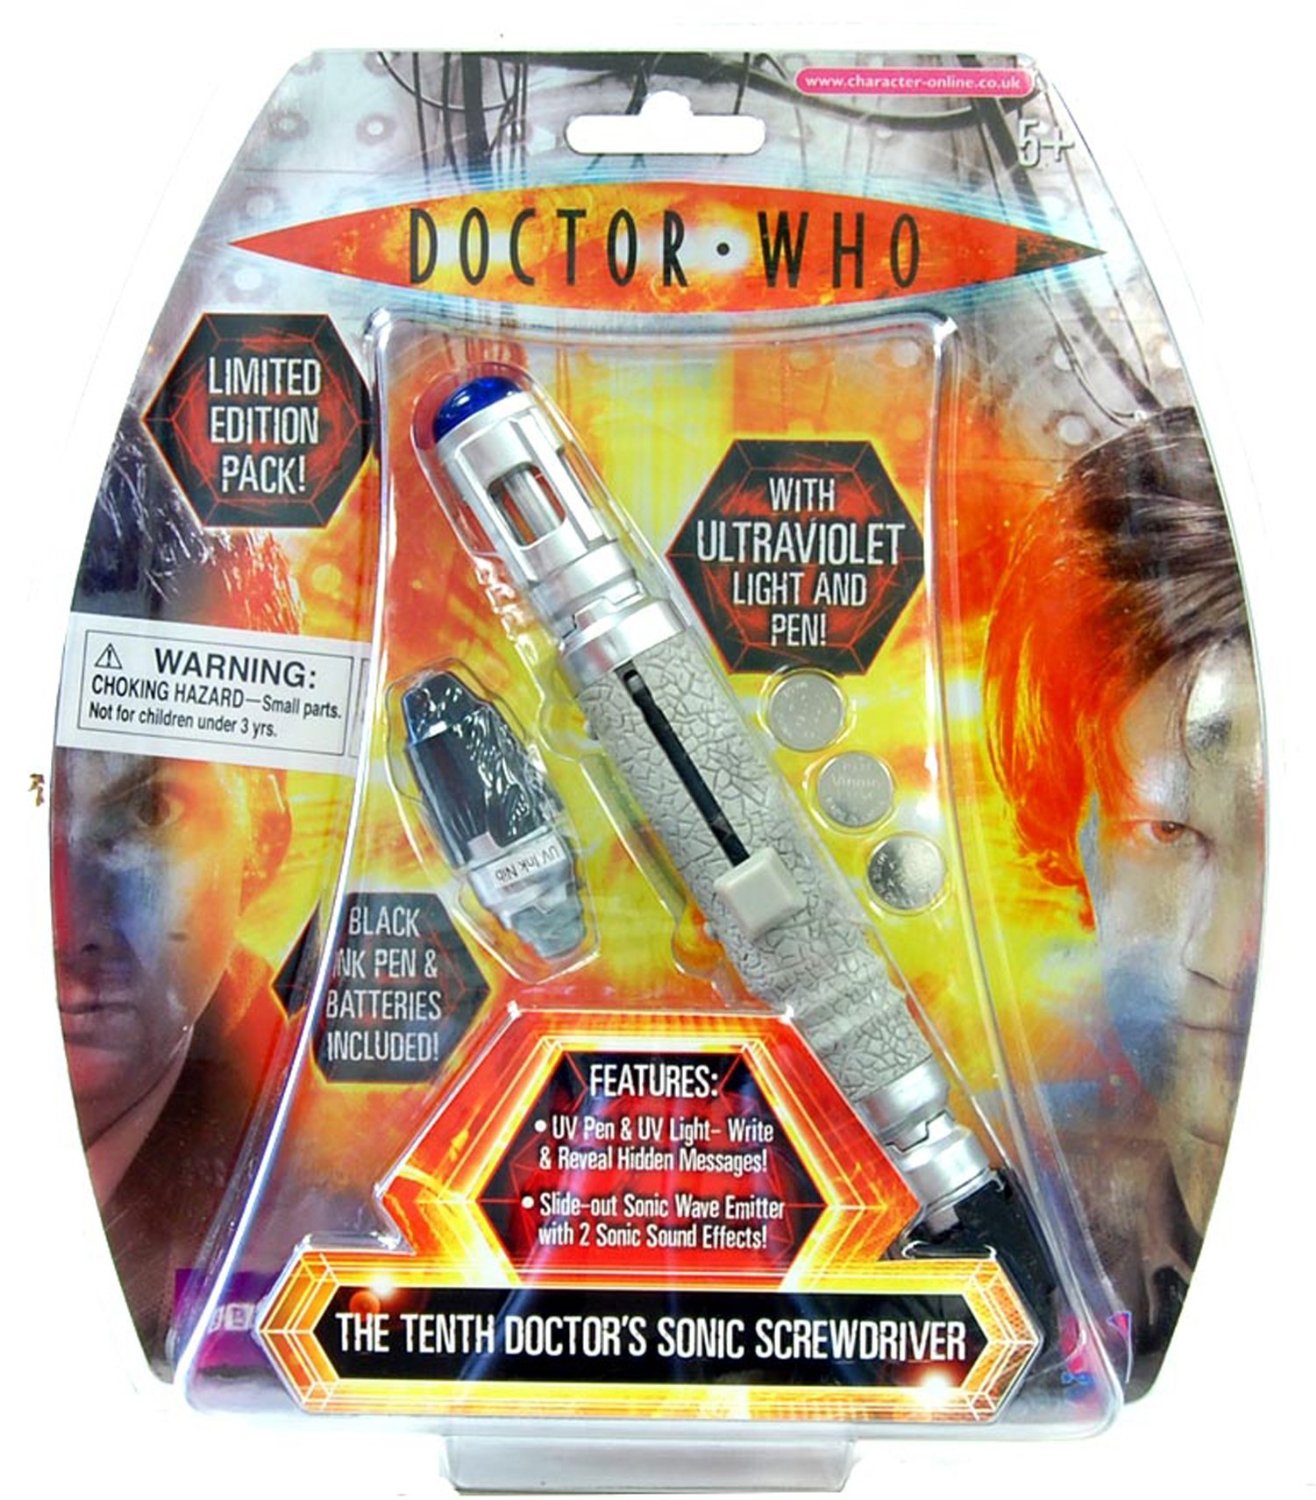 Doctor-Who-the-tenth-sonic-screwdriver